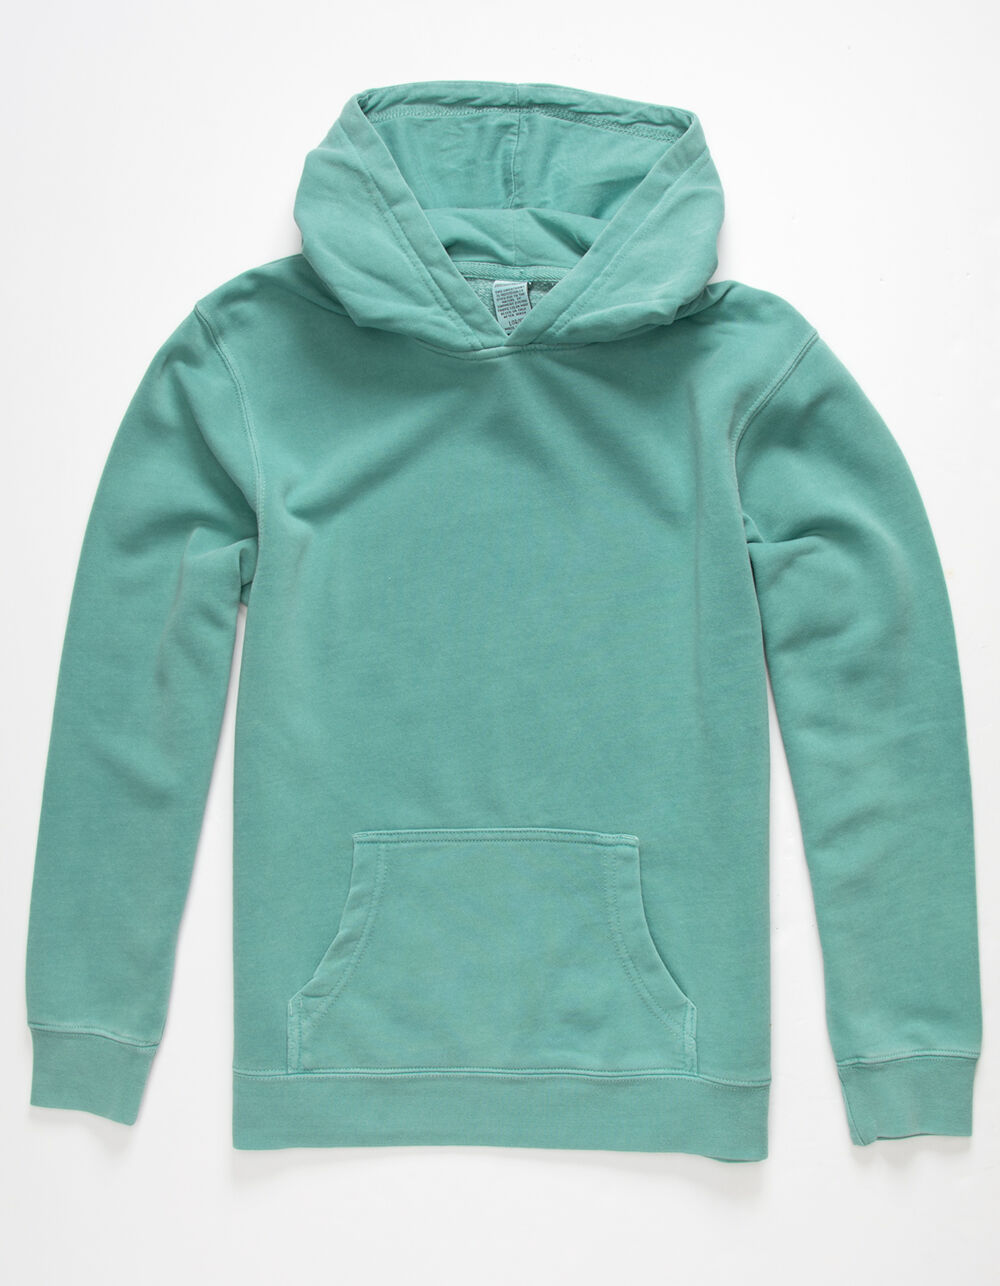 INDEPENDENT TRADING COMPANY Pigment Dye Boys Mint Hoodie - MINT | Tillys